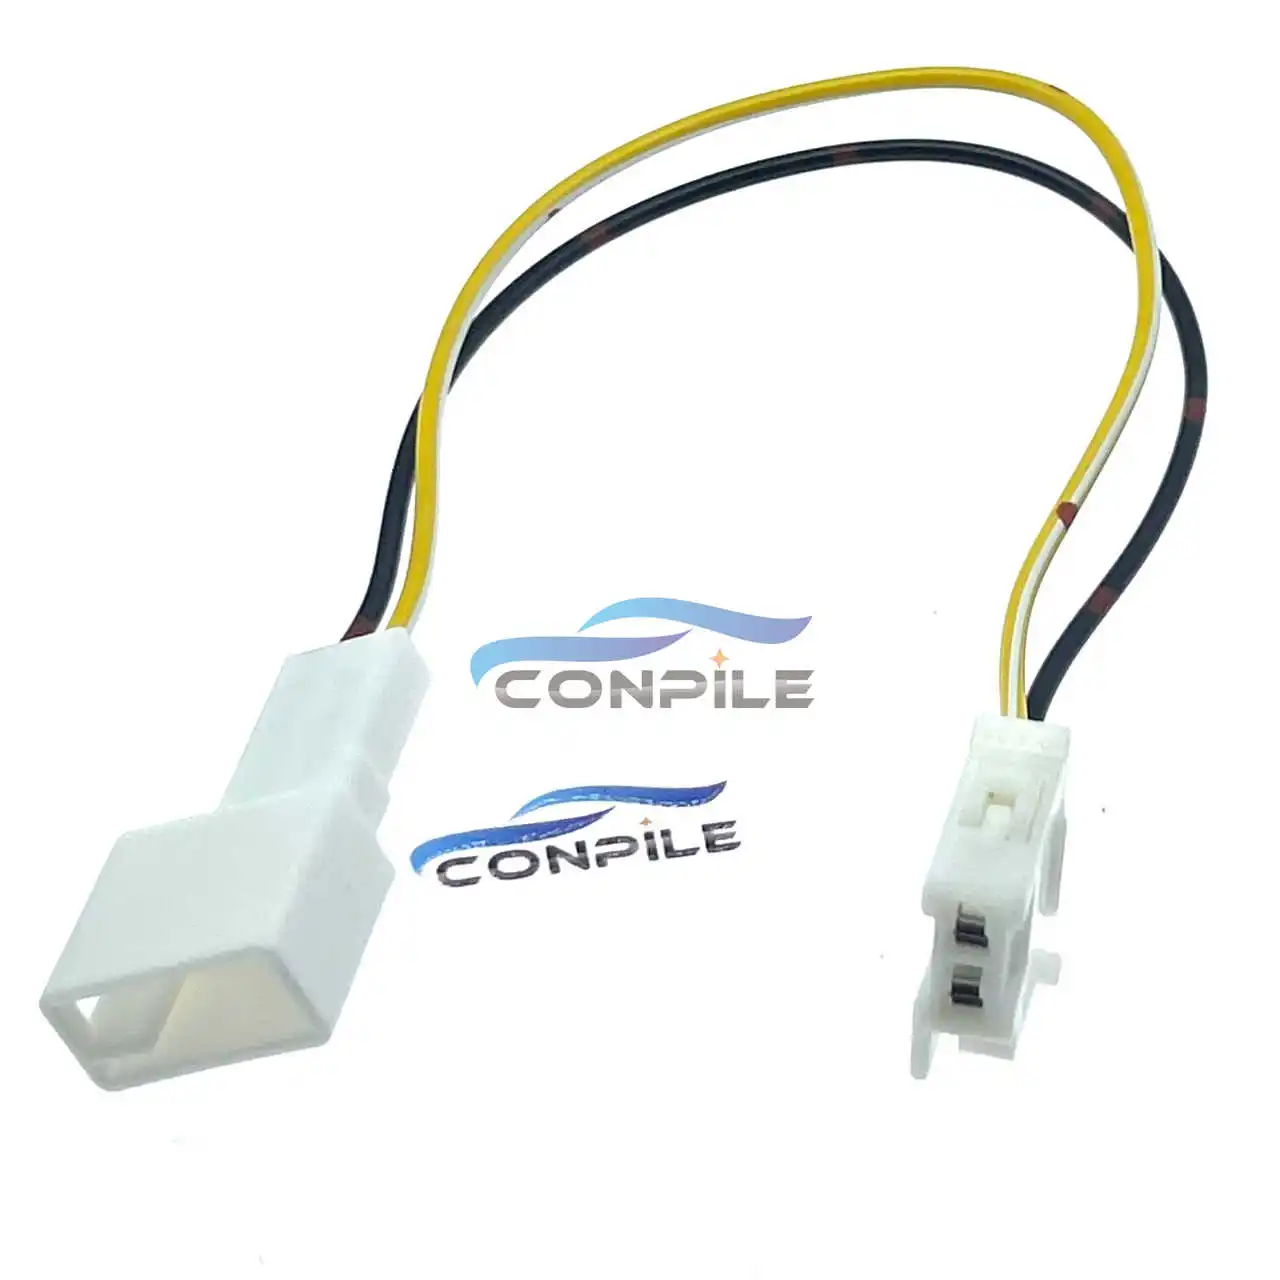 

for Toyota Lexus Corolla 12347 tweeter amplify audio 2PIN car wiring harness plug connector cable